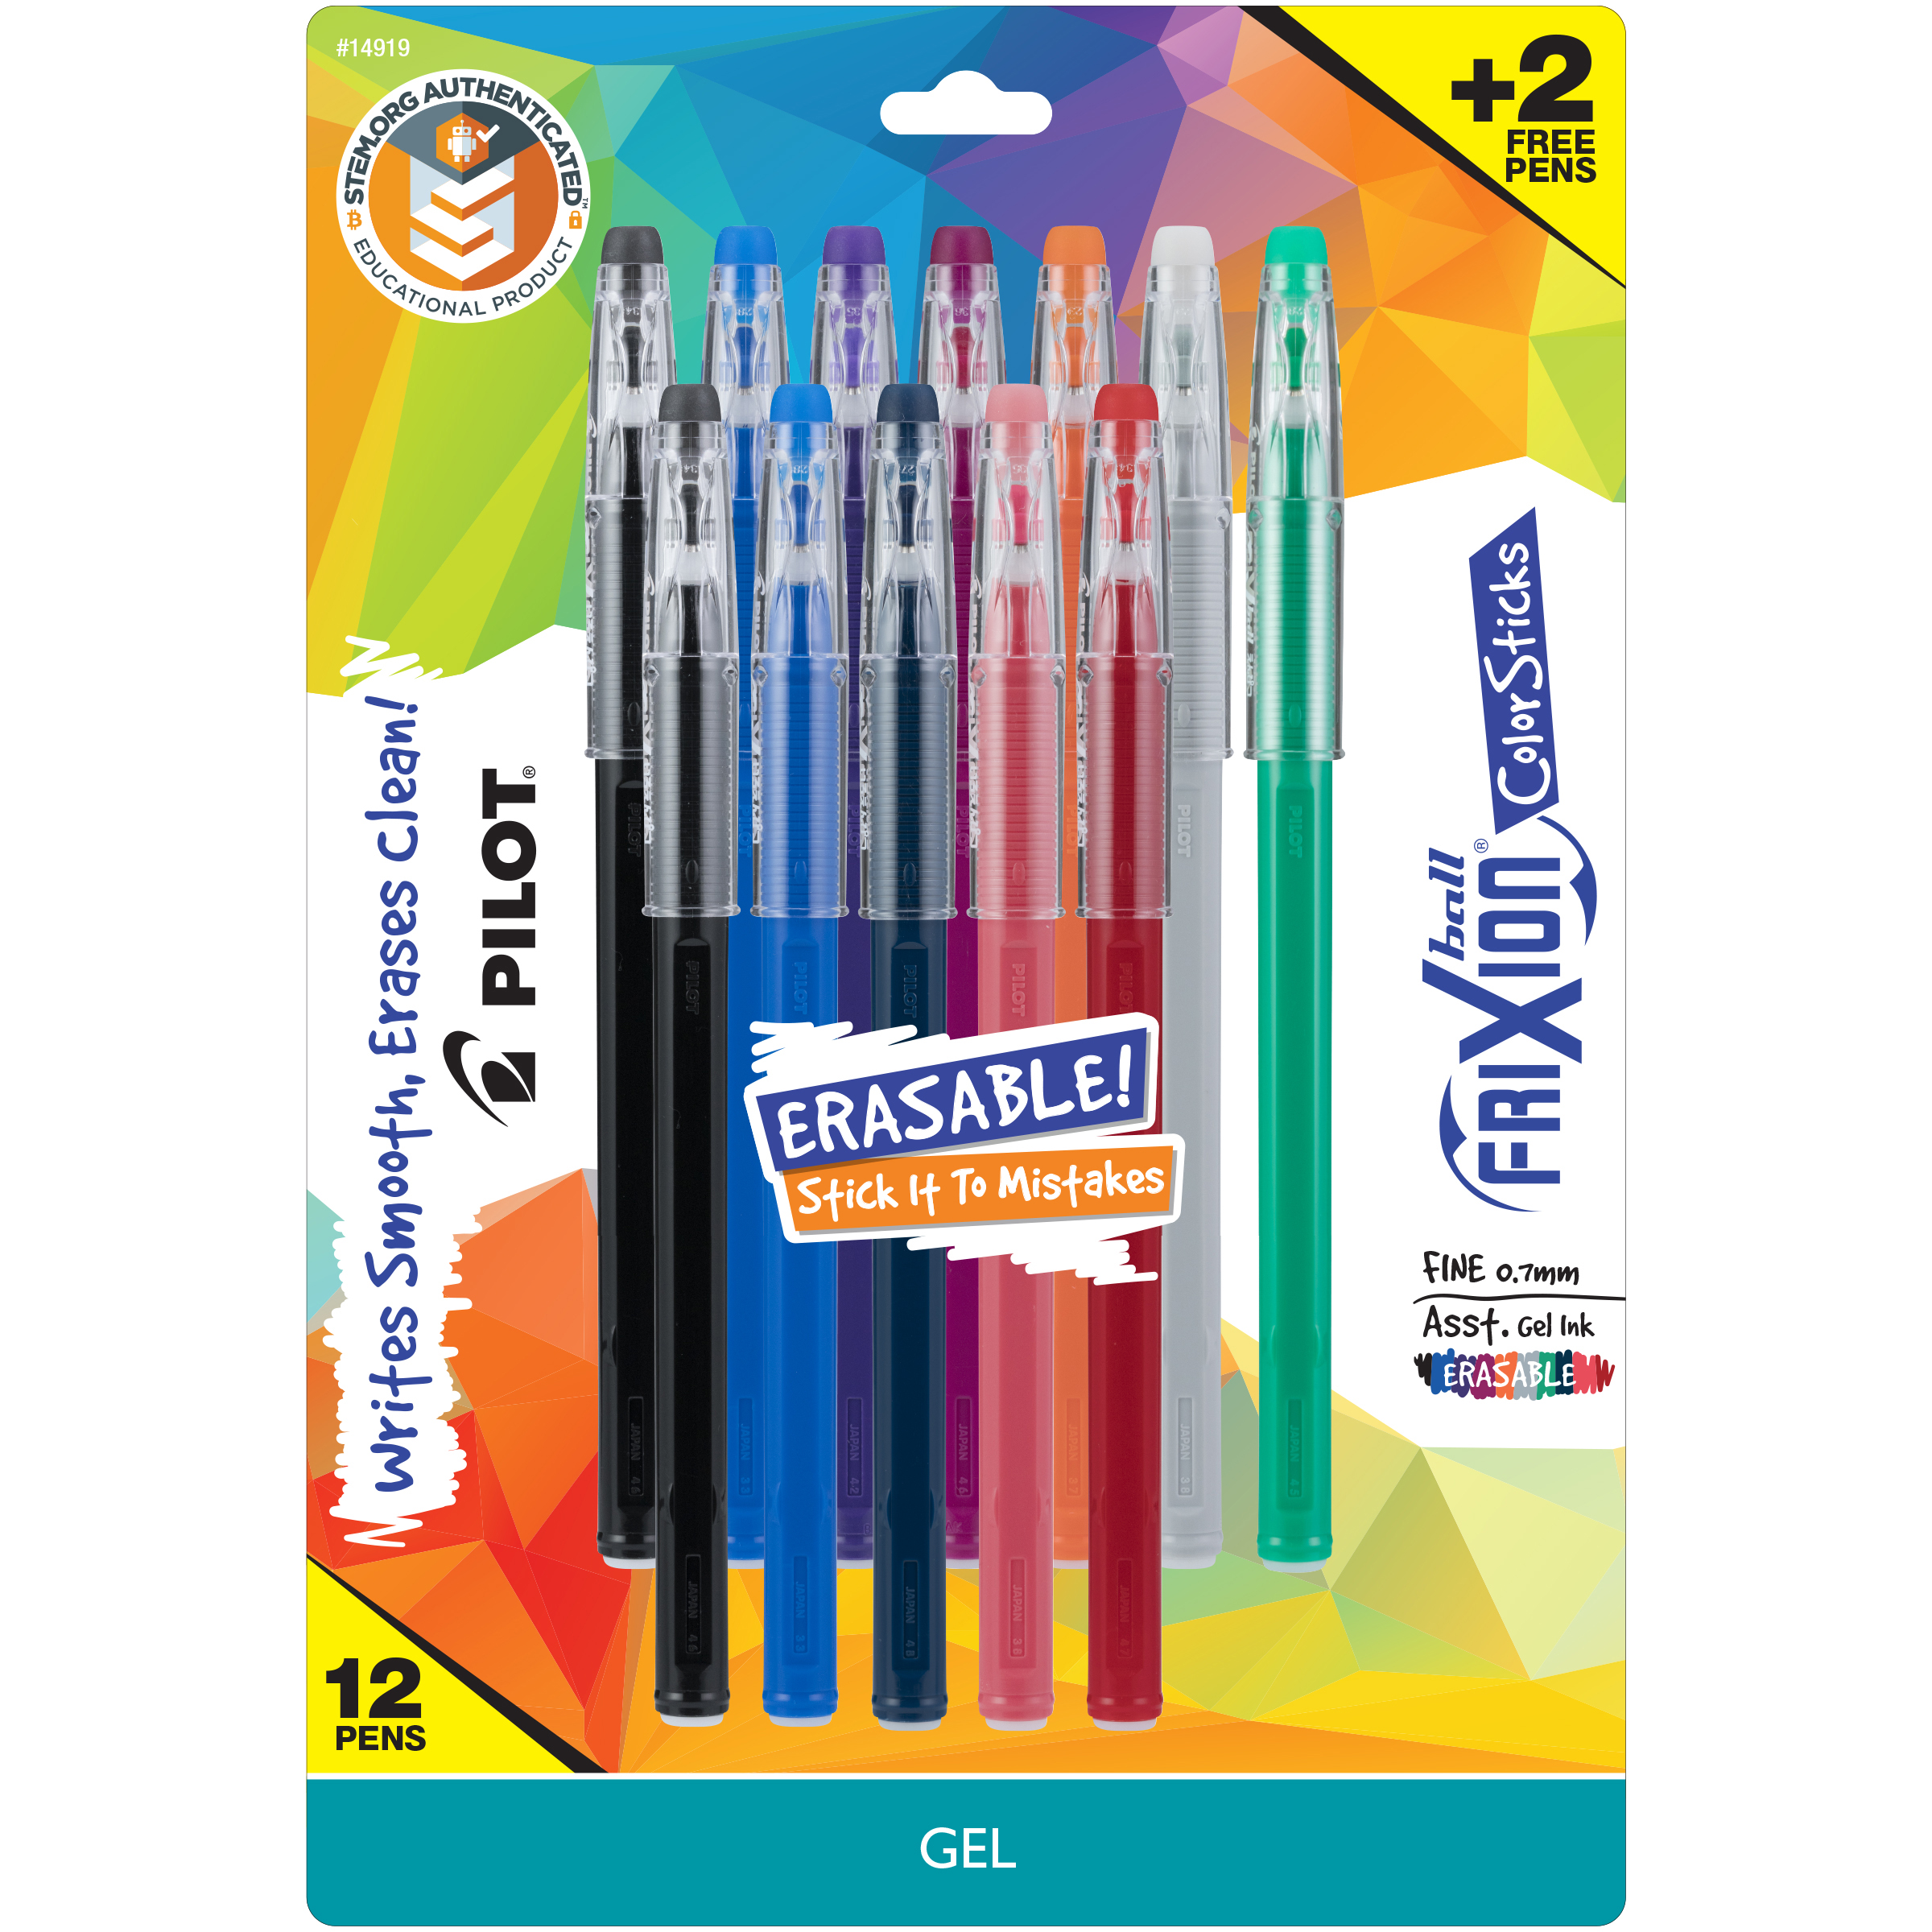 From August 3 through November 8, 2022, Pilot will donate 25 percent of the profits (up to $50,000) from every purchase of the FriXion ColorSticks 10-packs sold at Walmart, Target and other retailers nationwide, and of the FriXion ColorSticks 16-pack sold on Amazon, to Girls Who Code.